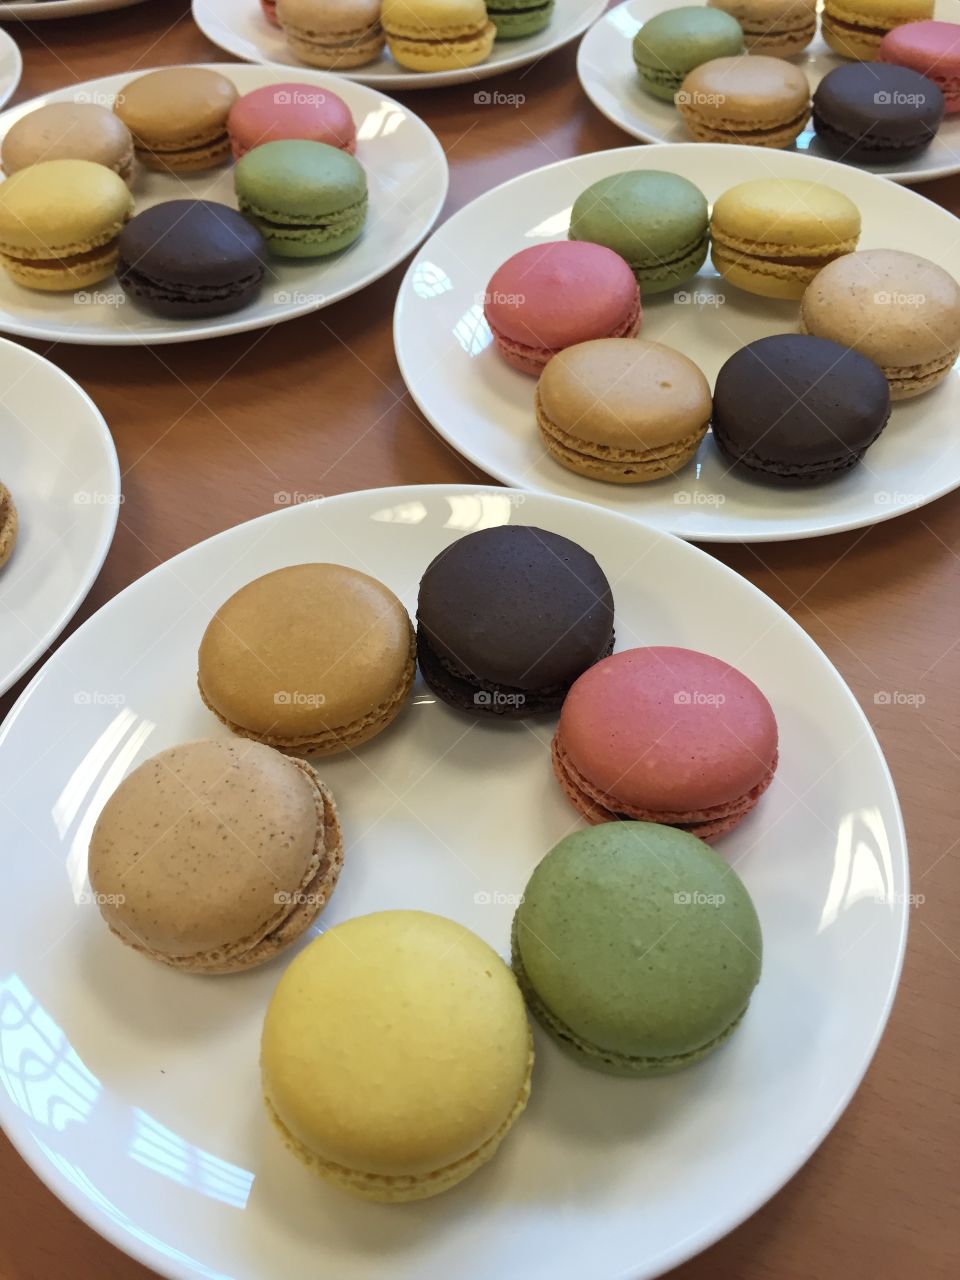 Macarones on a plate at a restaurant in Malmö Sweden.